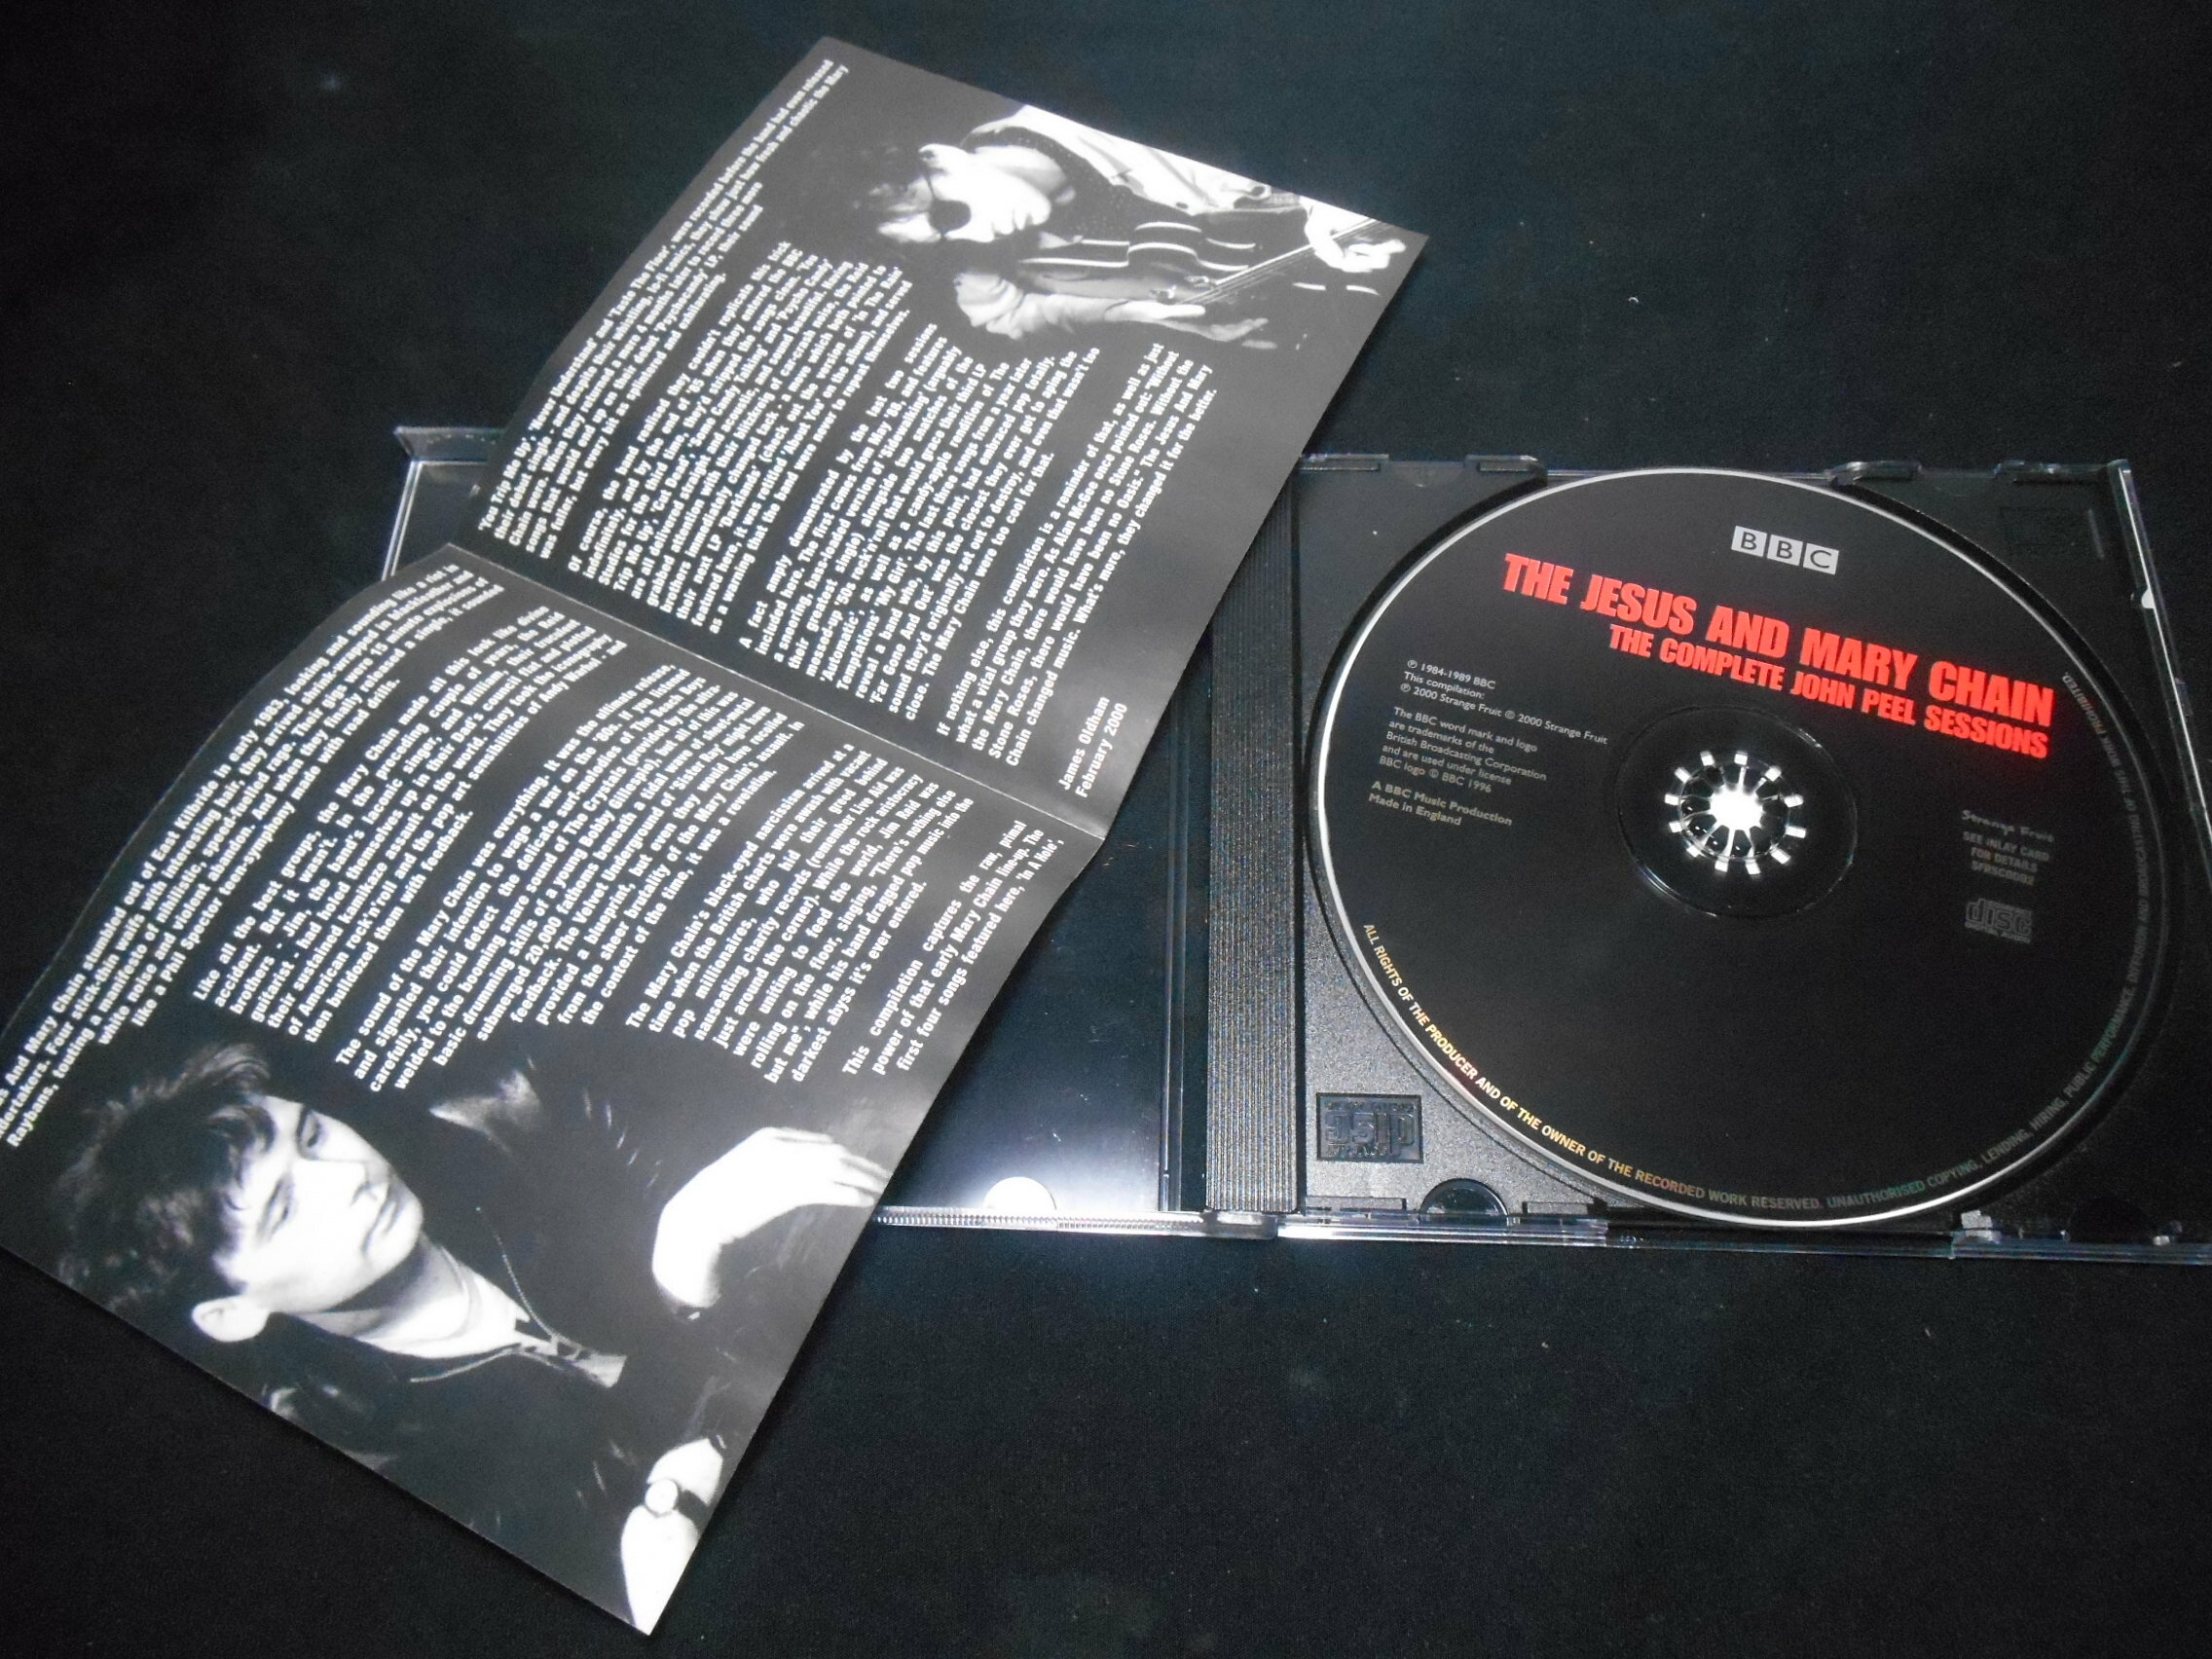 CD - Jesus and Mary Chain The - The Complete John Peel Sessions (England)